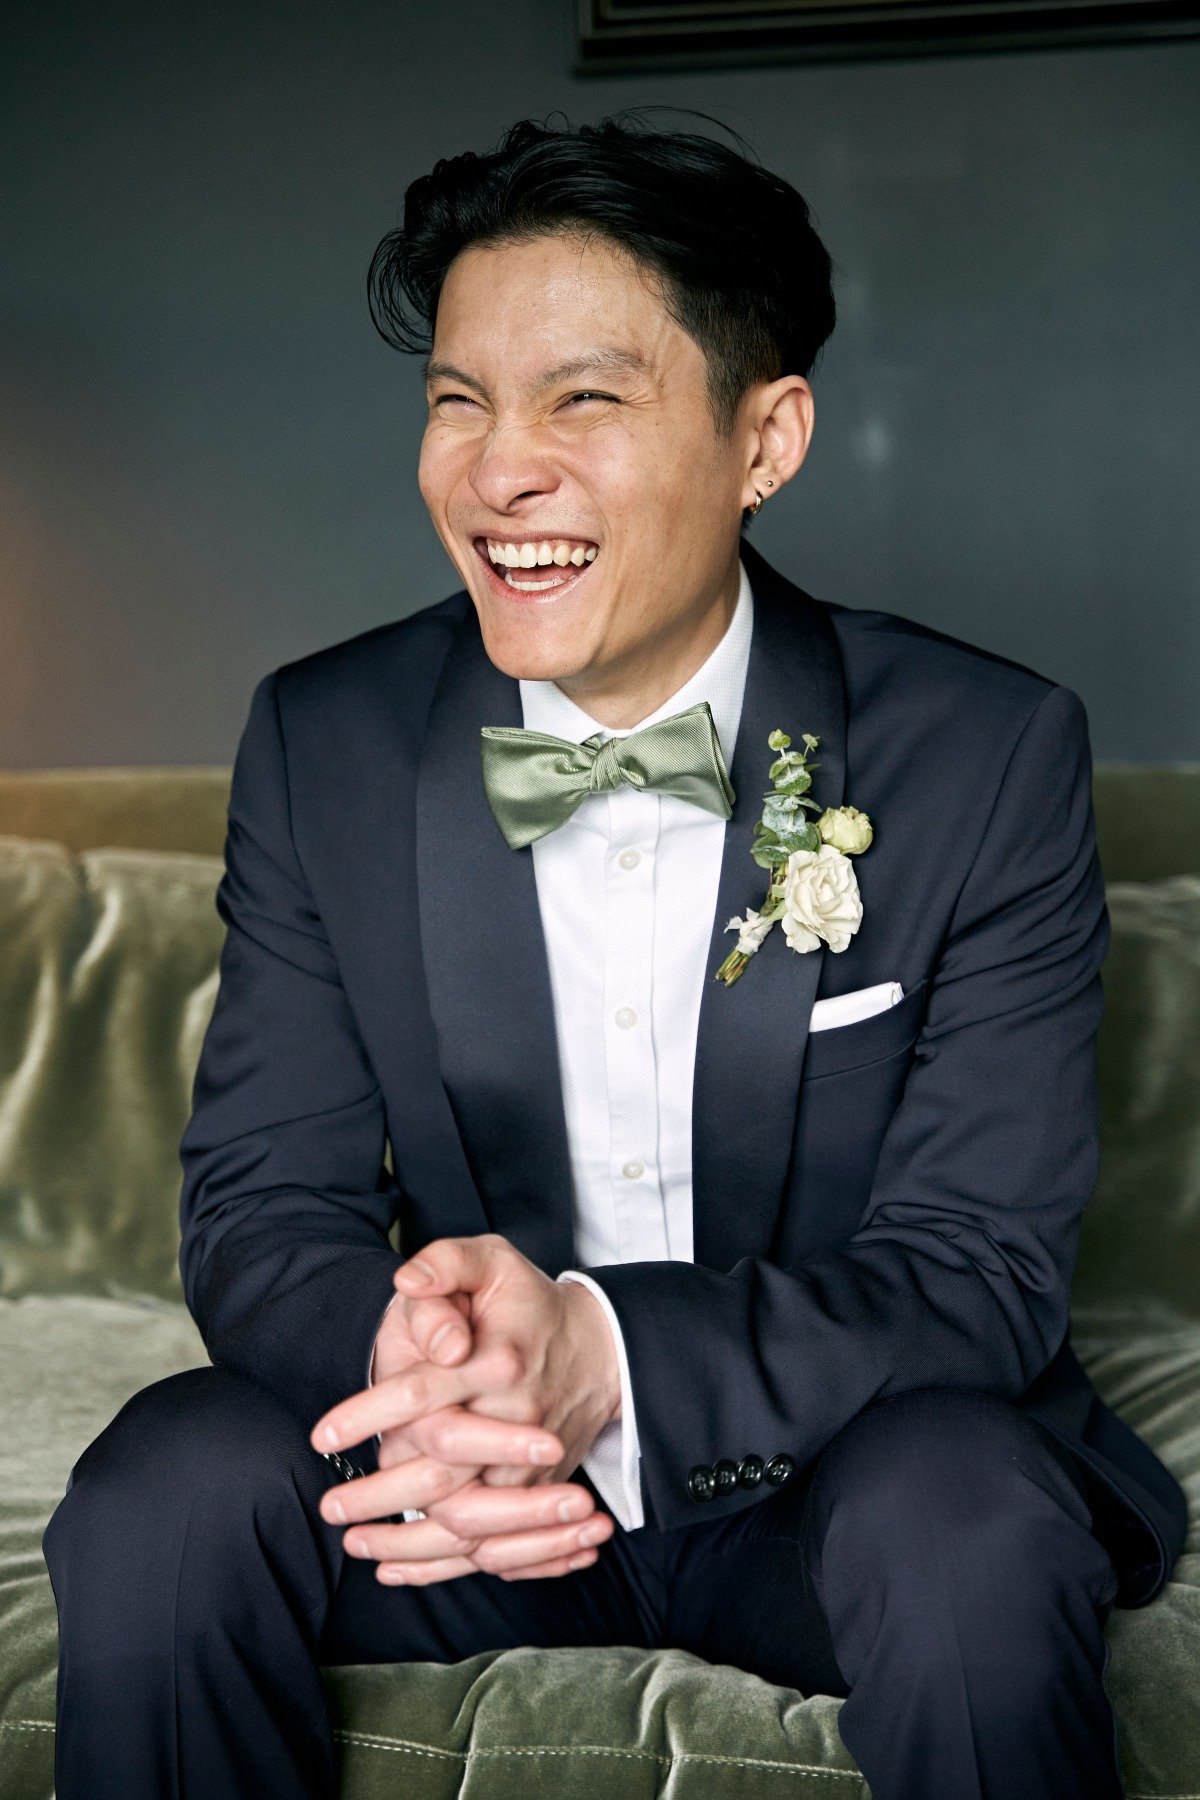 Handsome groom in olive green accented tuxedo and bowtie